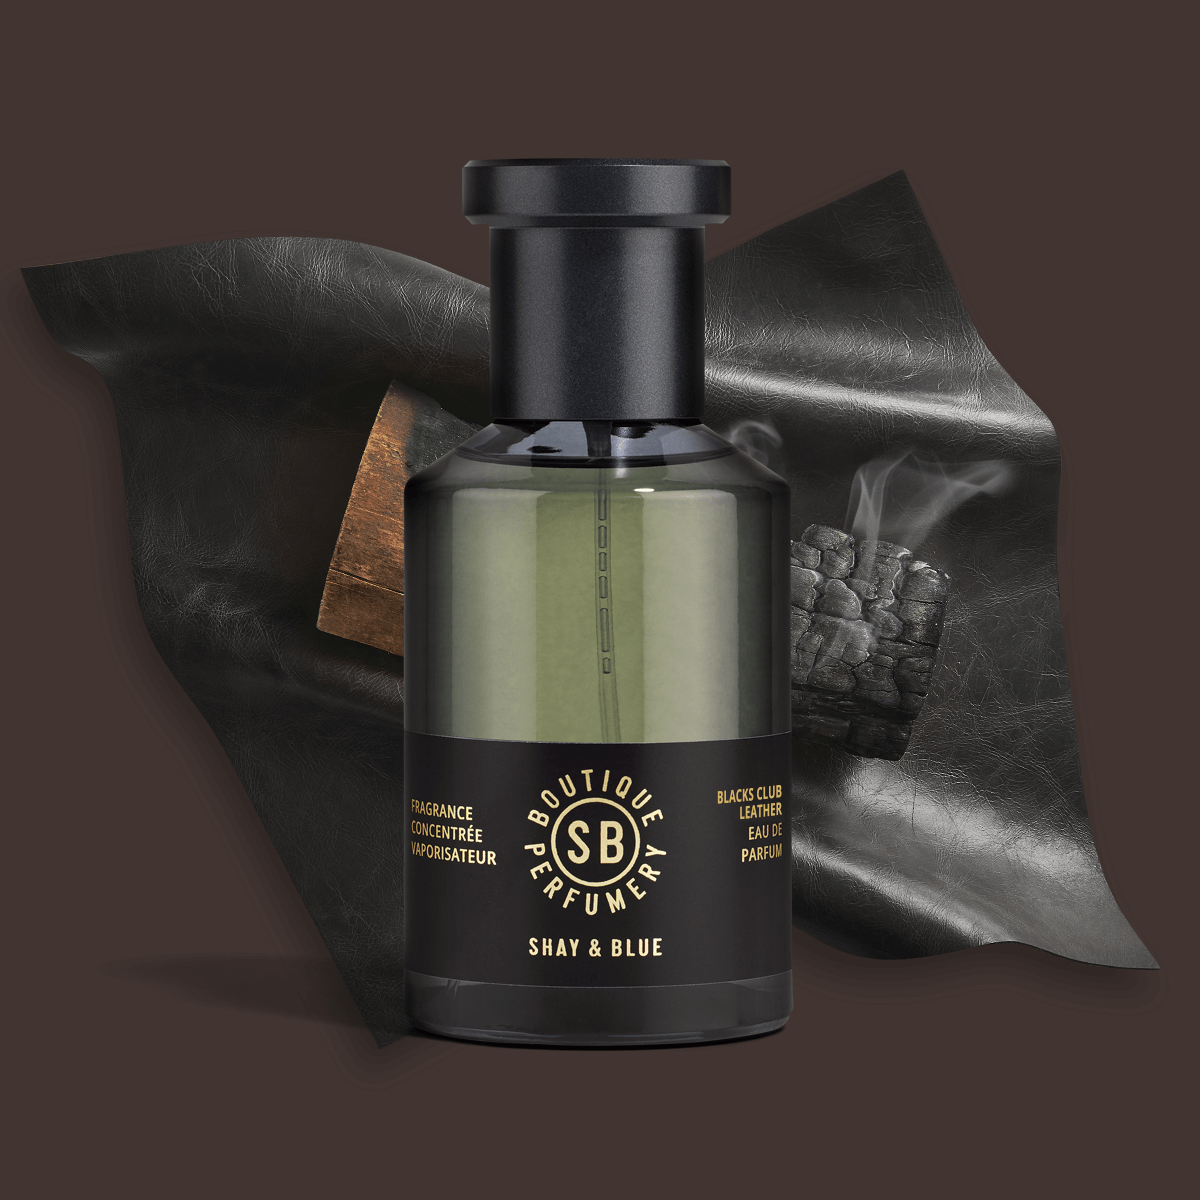 Blacks Club Leather Fragrance Concentrate 100ml | Rich with the scent of English leather, fire wood and a smooth brandy. | Clean All Gender Fragrance | Shay & Blue